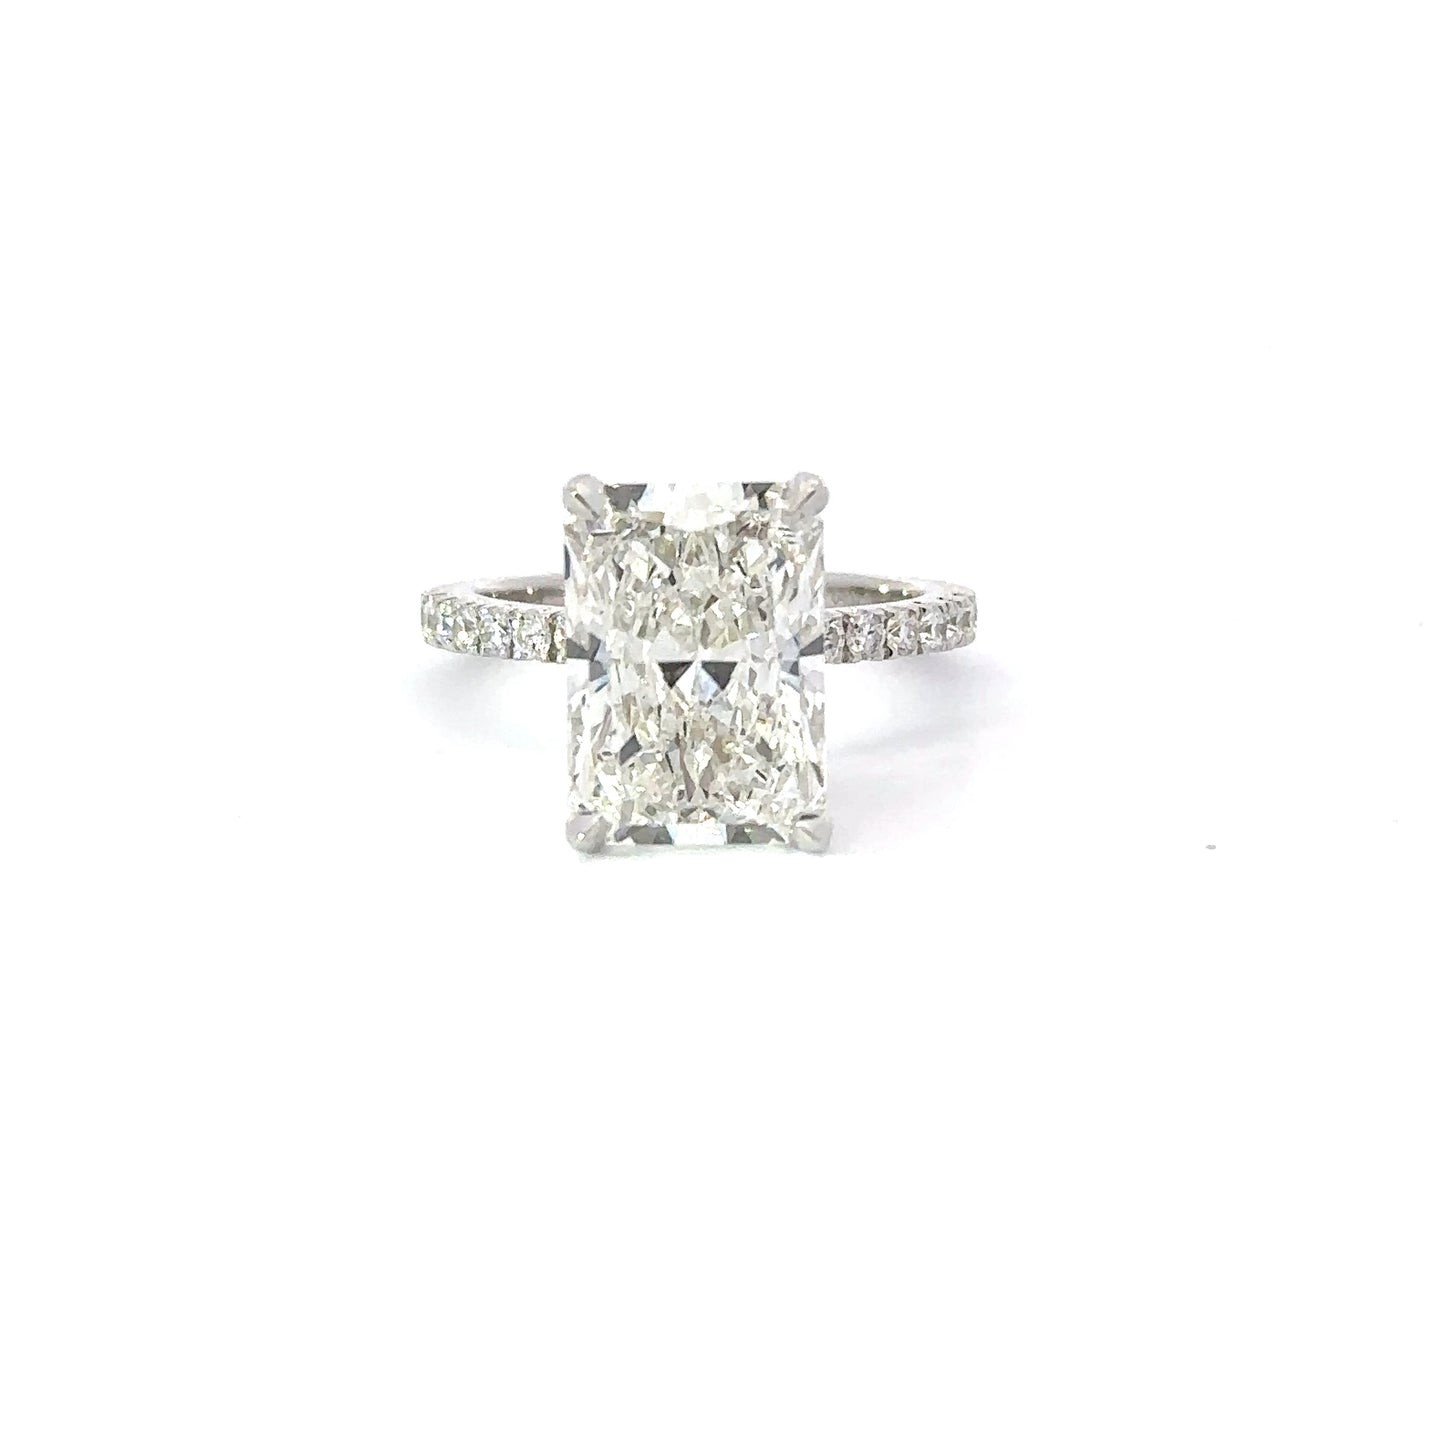 5.16 Carat Lab Created Radiant Engagement Ring with Signature Setting - Happy Jewelers Fine Jewelry Lifetime Warranty